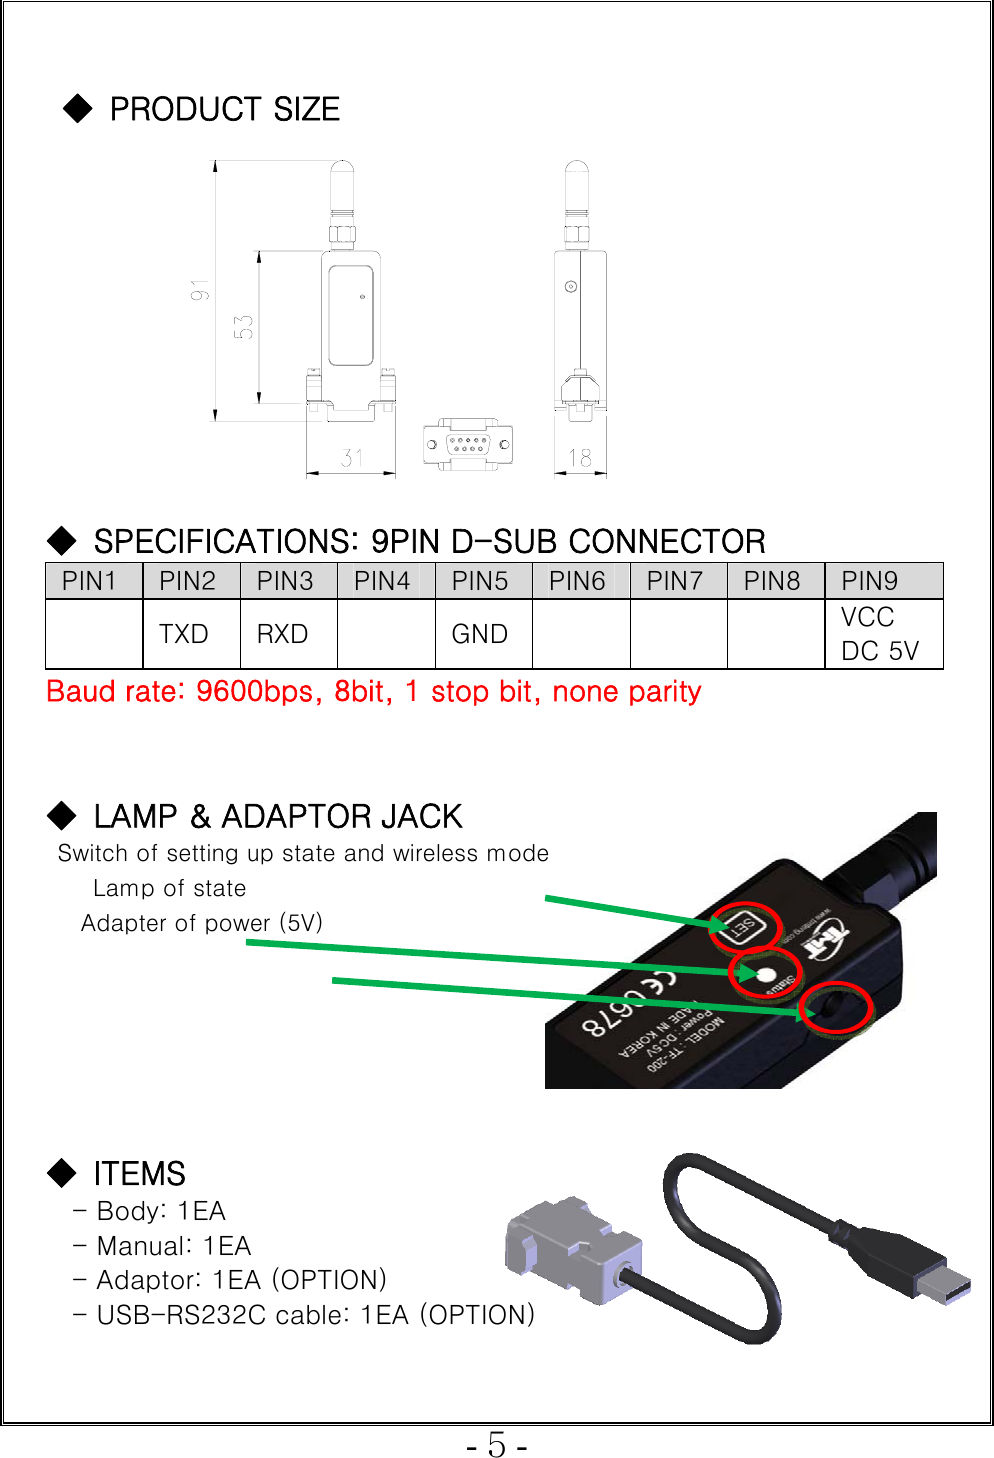  - 5 -   ◆ PRODUCT SIZE           ◆  SPECIFICATIONS: 9PIN D-SUB CONNECTOR PIN1  PIN2 PIN3  PIN4 PIN5 PIN6 PIN7 PIN8  PIN9   TXD  RXD    GND       VCC DC 5VBaud rate: 9600bps, 8bit, 1 stop bit, none parity     ◆  LAMP &amp; ADAPTOR JACK   Switch of setting up state and wireless mode  Lamp of state  Adapter of power (5V)       ◆  ITEMS - Body: 1EA     - Manual: 1EA - Adaptor: 1EA (OPTION) - USB-RS232C cable: 1EA (OPTION)  